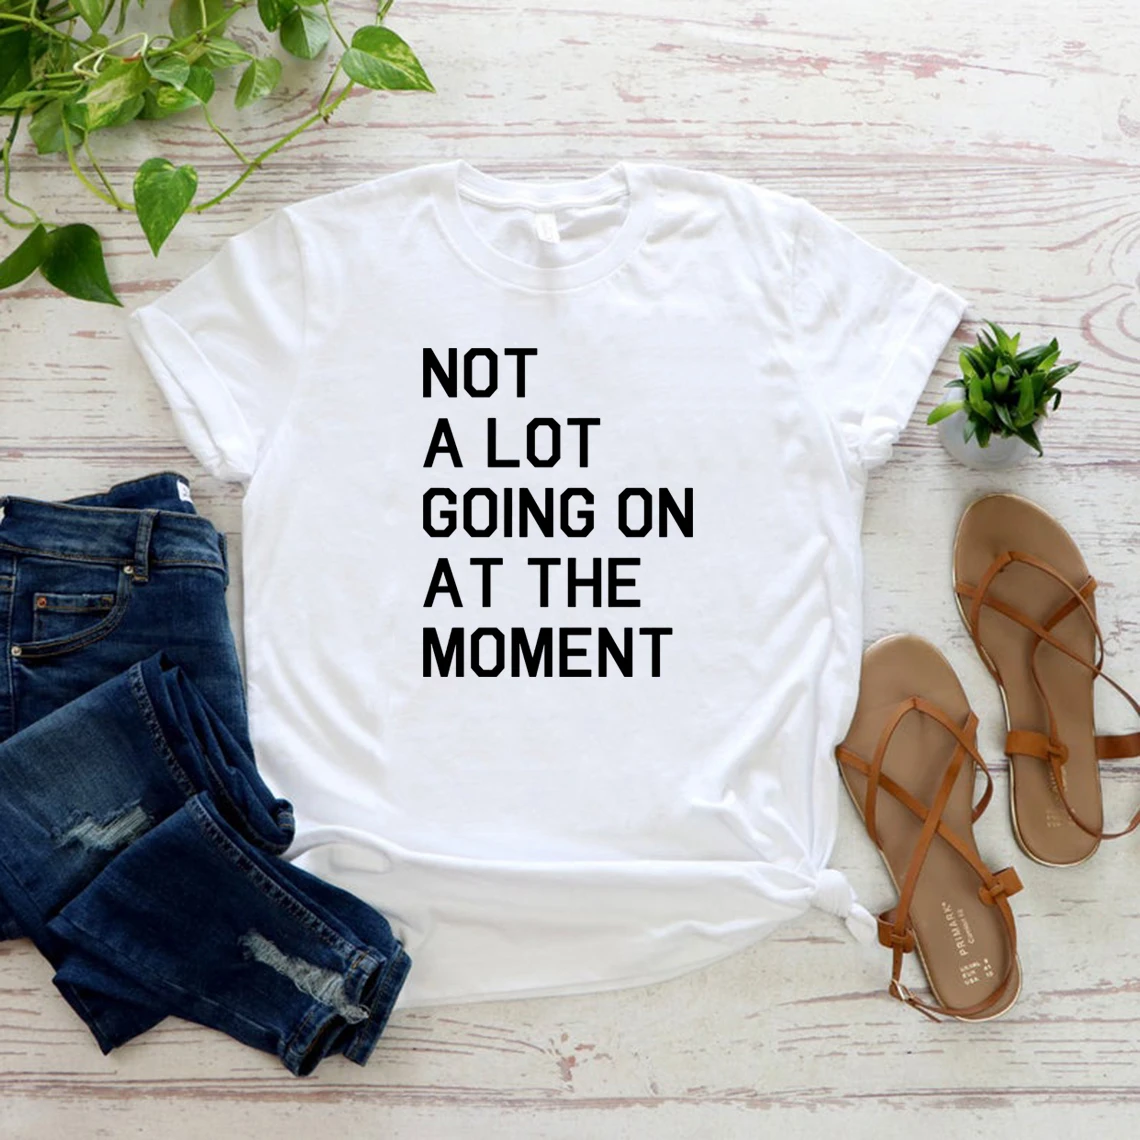 

Not A Lot Going on At The Moment T-Shirt Taylor 22 Music Video T-shirt Women Graphic Tees Short Sleeve Casual Streetwear Tshirts